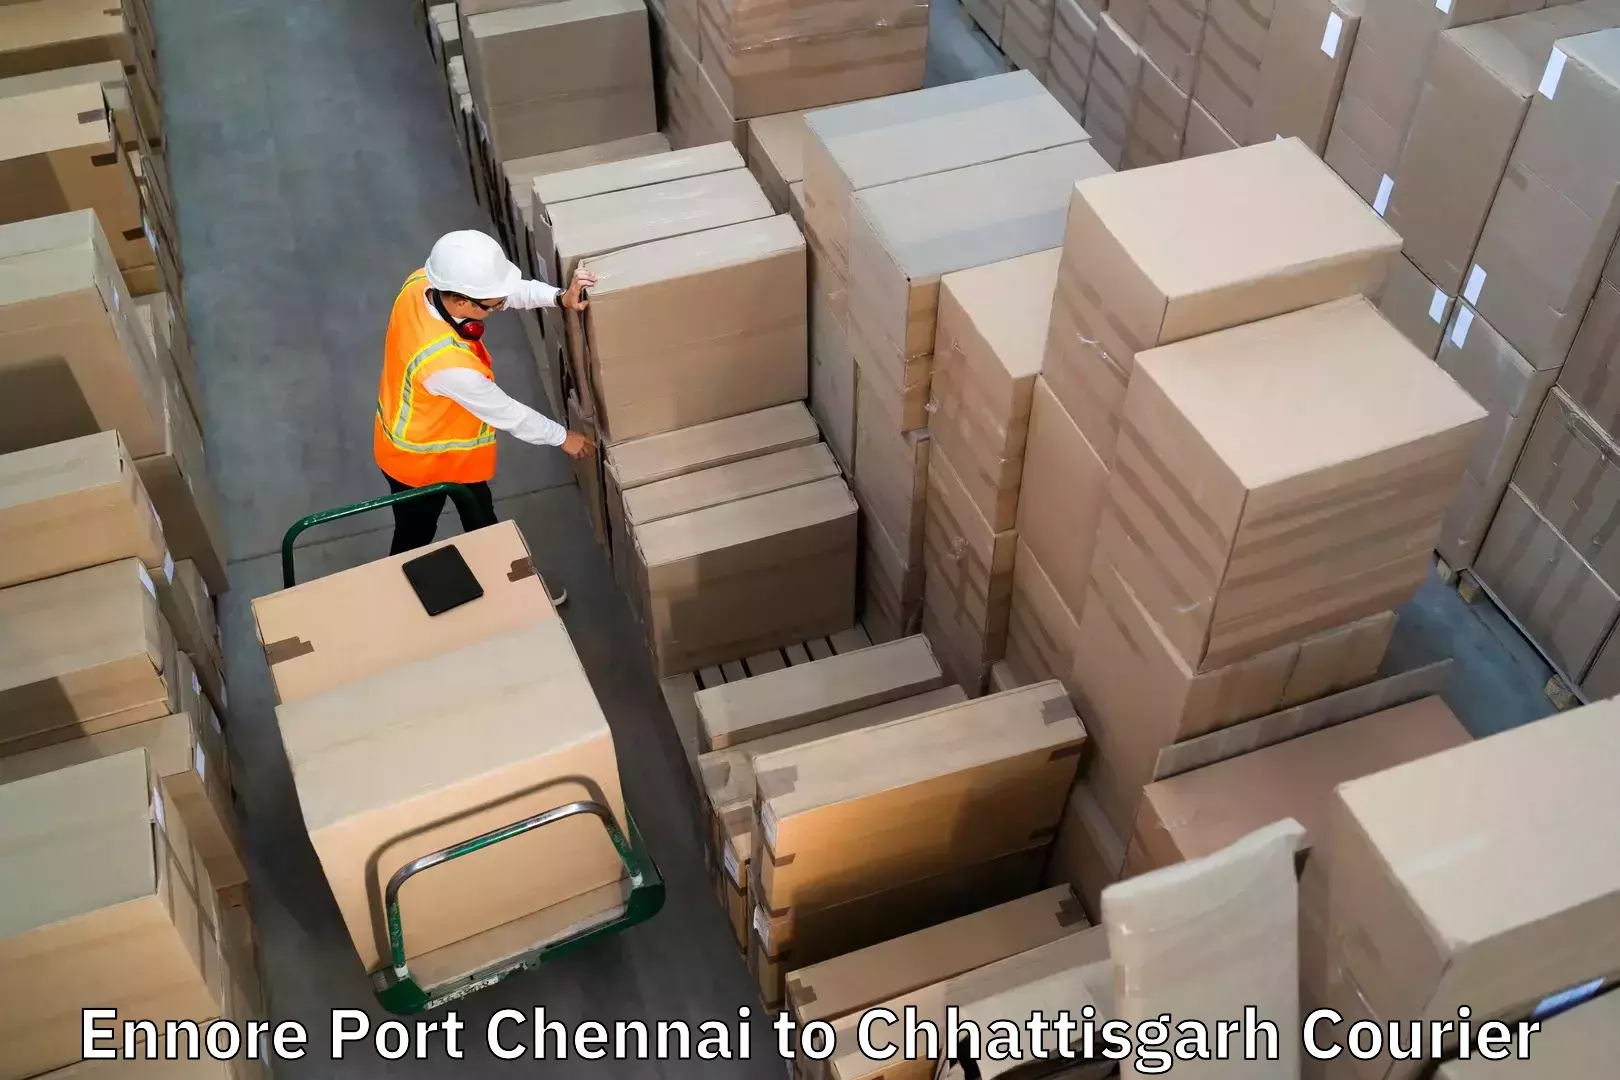 Budget-friendly baggage courier Ennore Port Chennai to Raigarh